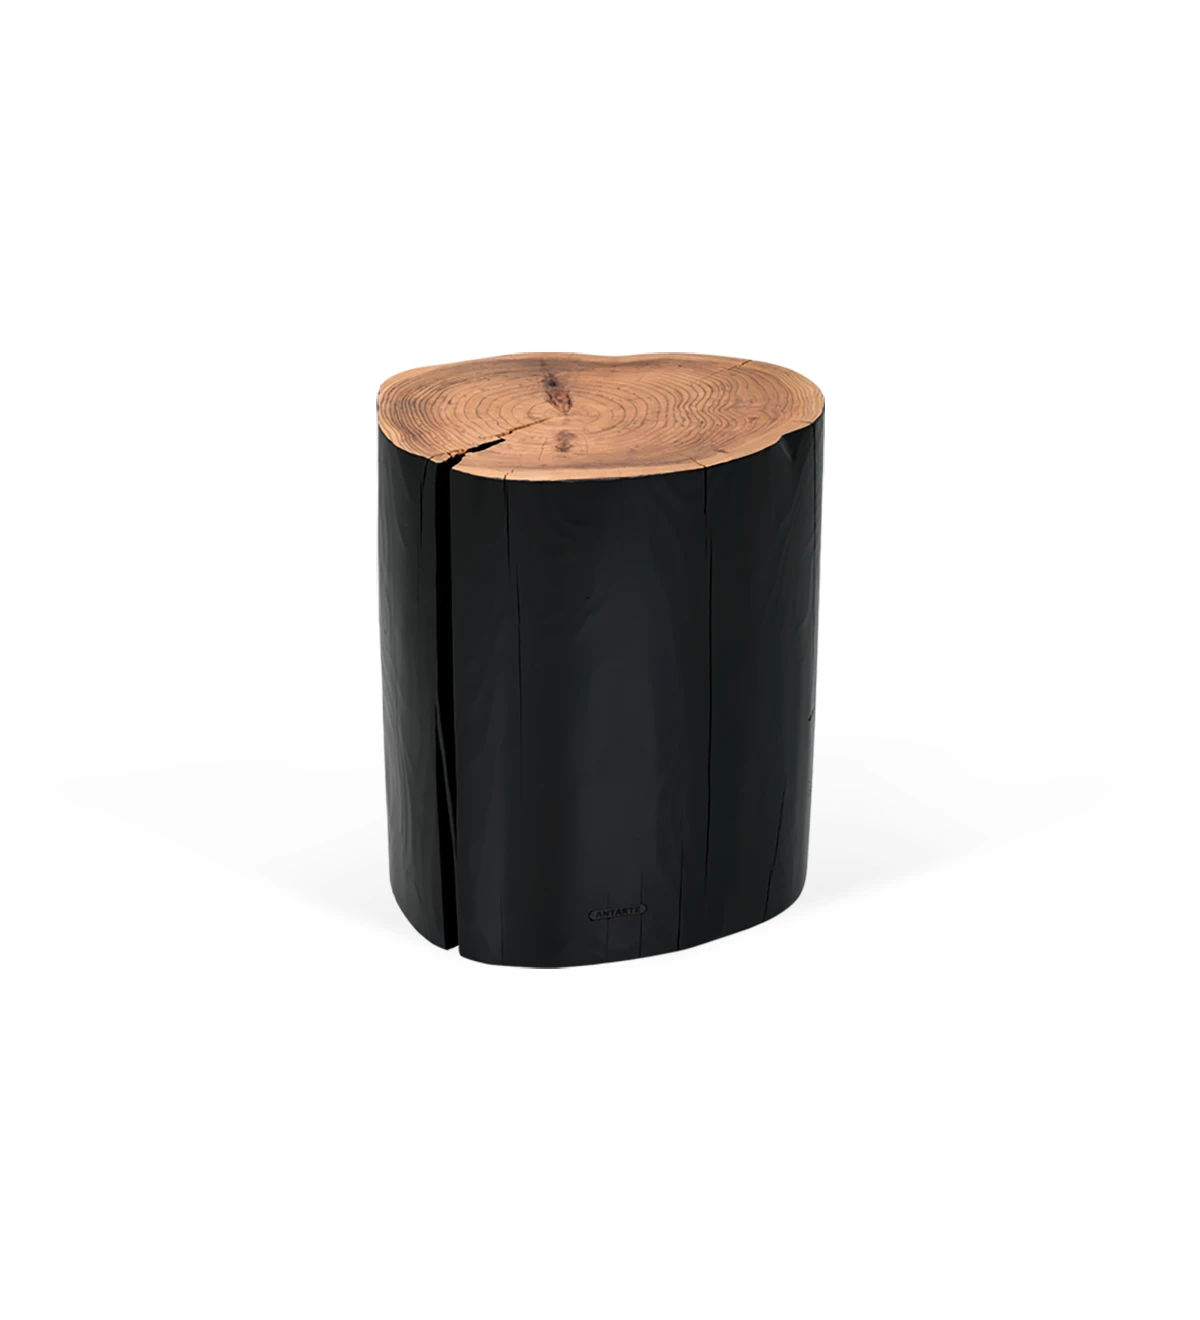 High trunk center table in natural cryptomeria wood lacquered in black, Ø 45 to 55 cm.